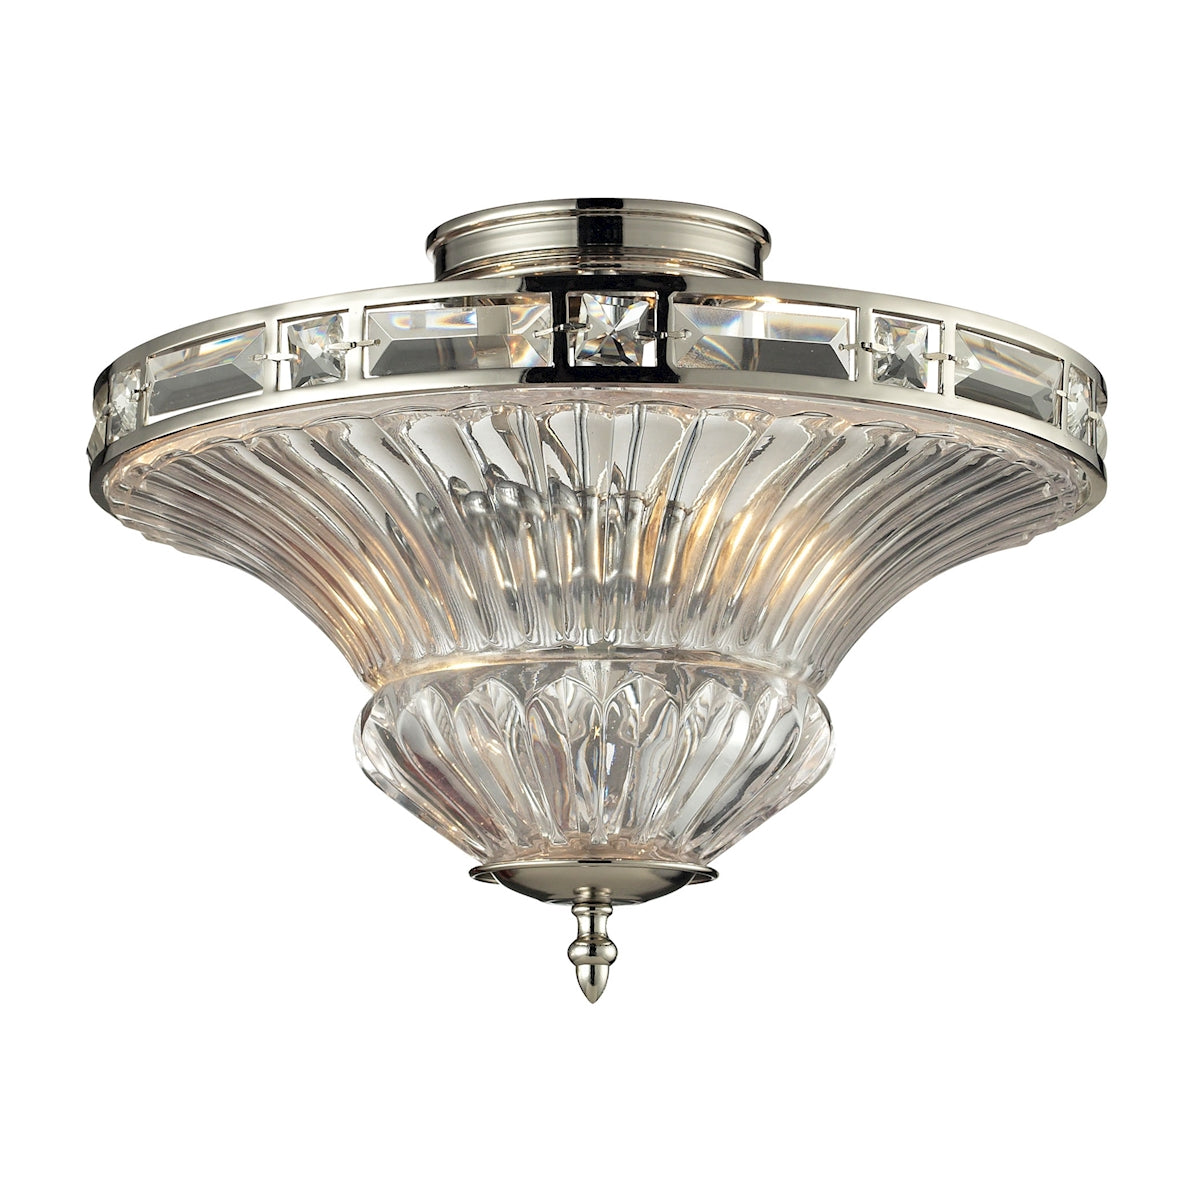 ELK Lighting 31500/2 Aubree 2-Light Semi Flush in Polished Nickel with Clear Glass Diffuser